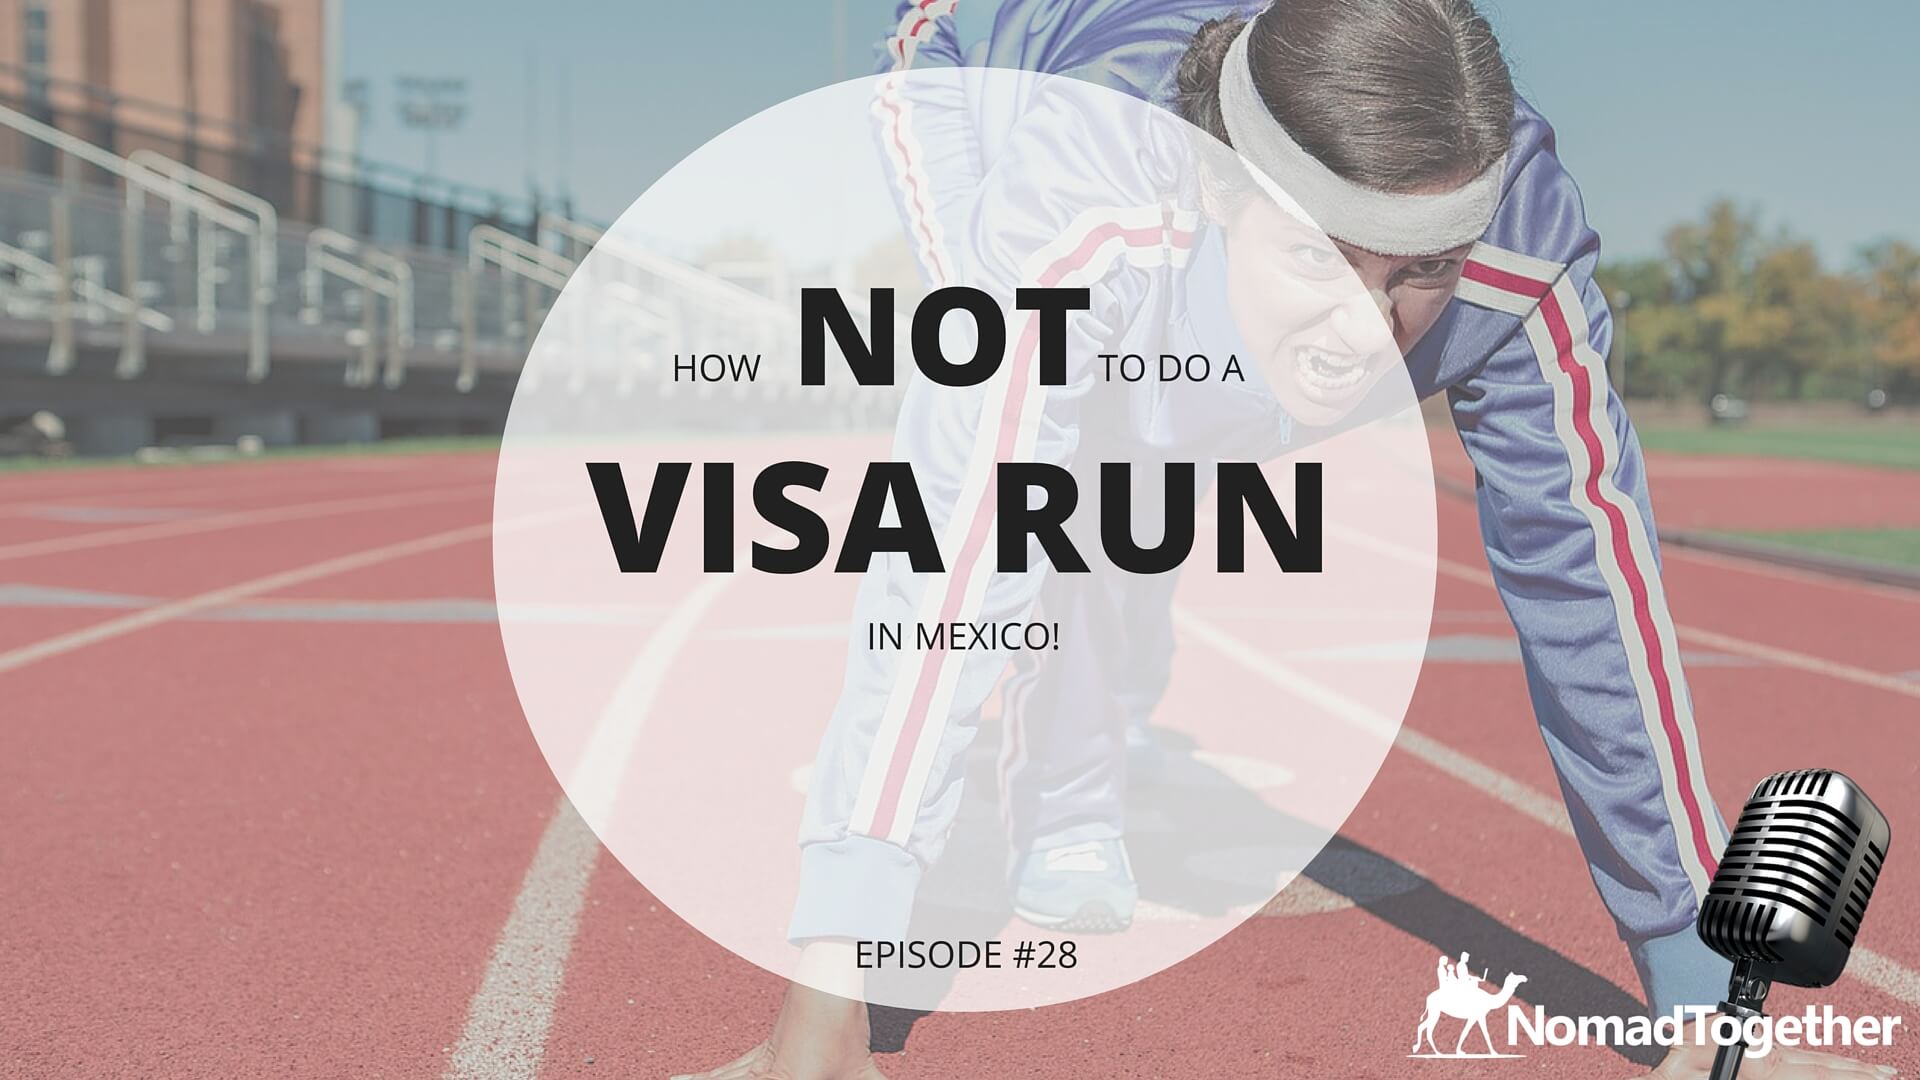 Episode #28: What They Don’t Tell You About Visa Runs